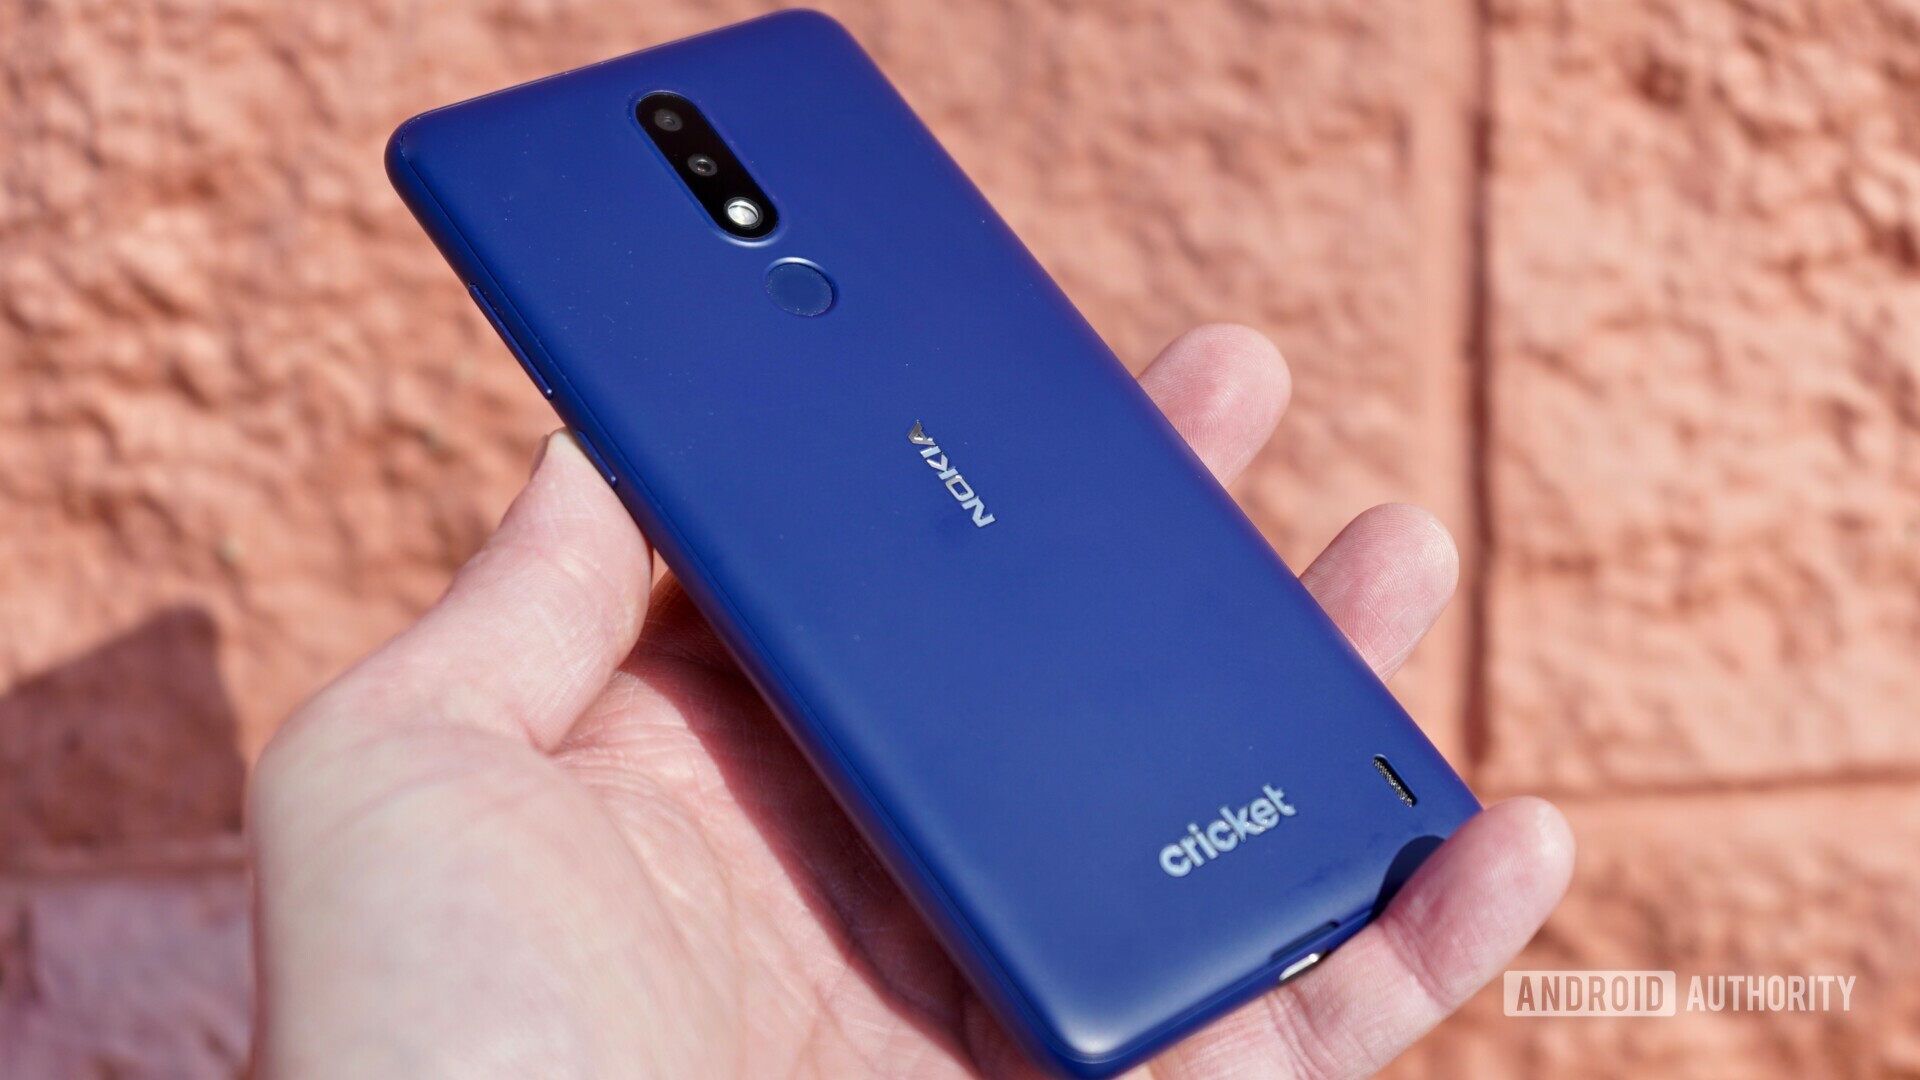 Back side view of the Blue Nokia 3.1 Plus held in a hand.